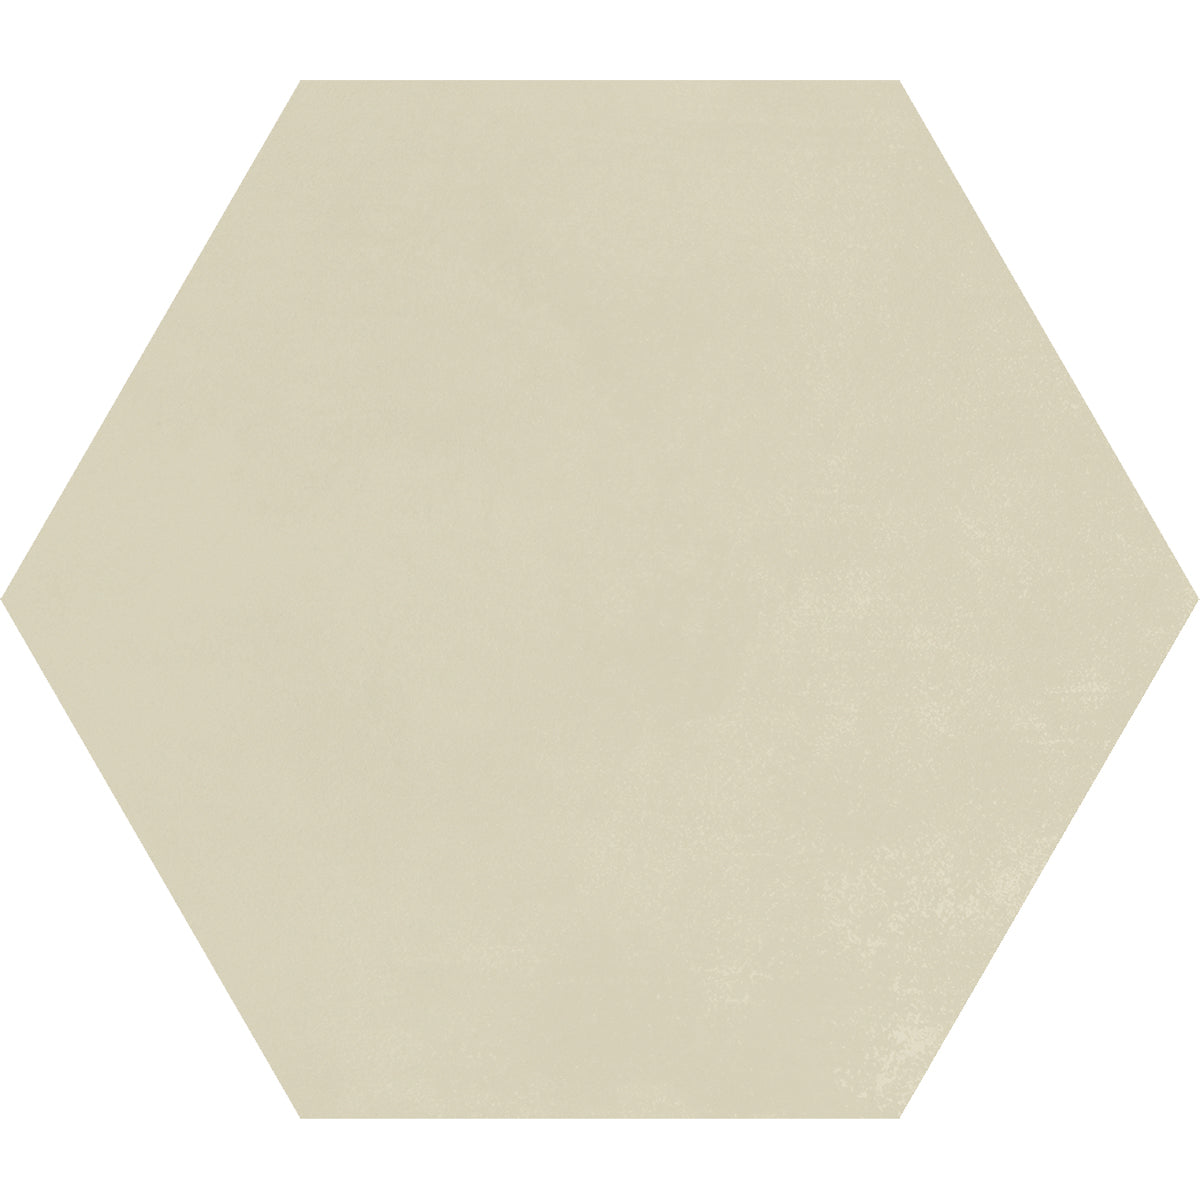 CommodiTile - Carrollton 9 in. x 10 in. Hexagon Porcelain Tile - Biscuit